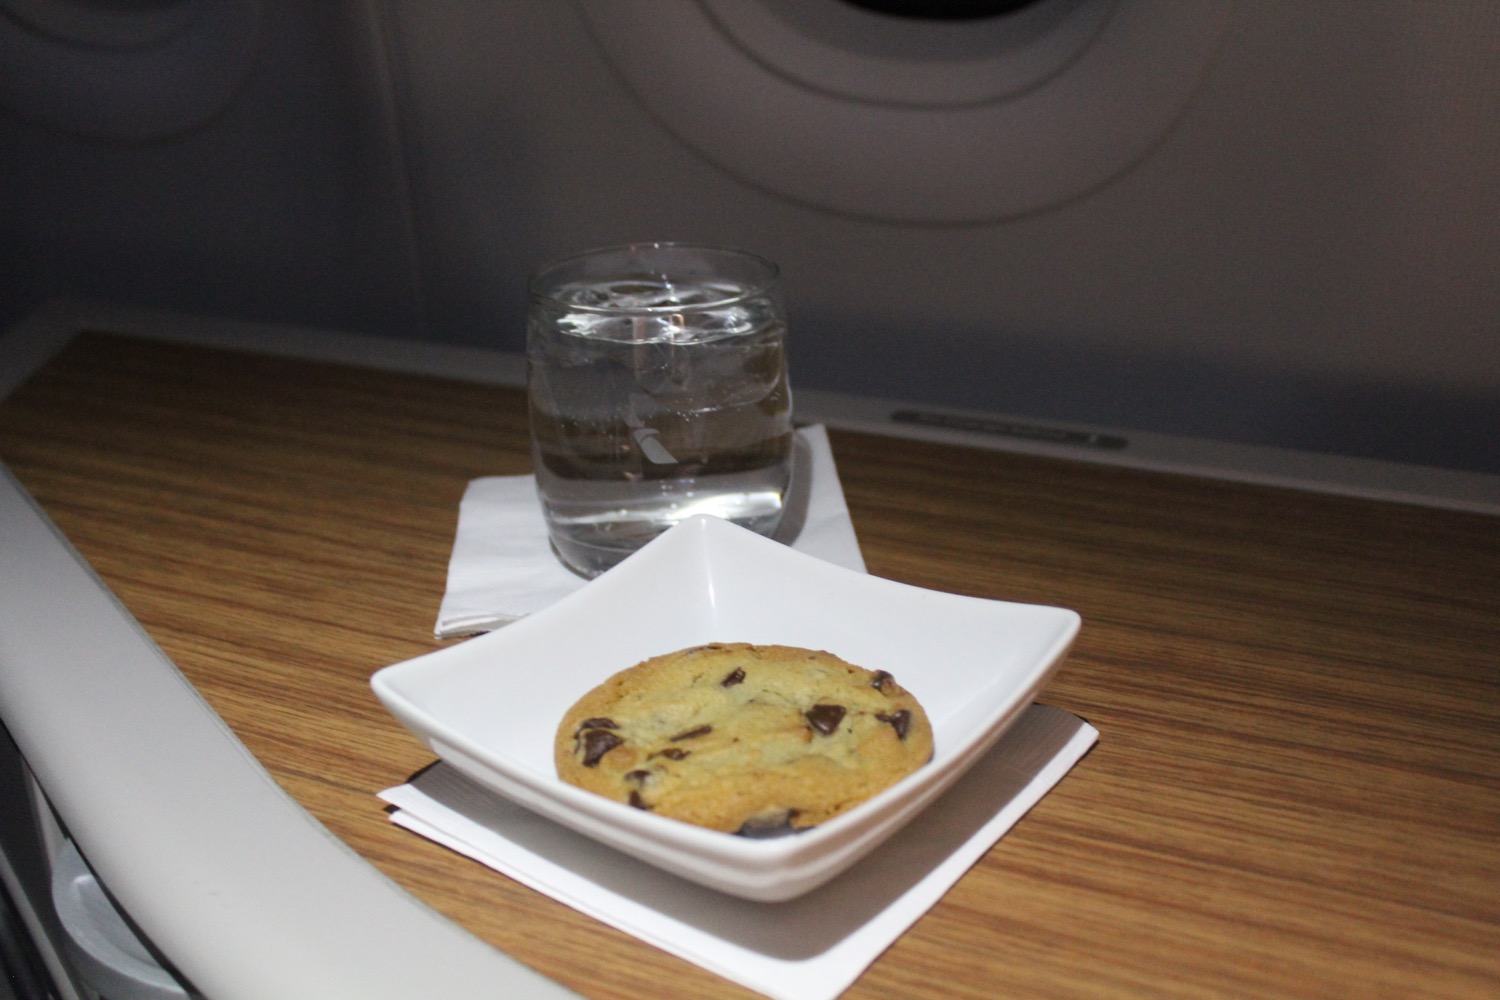 a cookie in a square bowl next to a glass of water